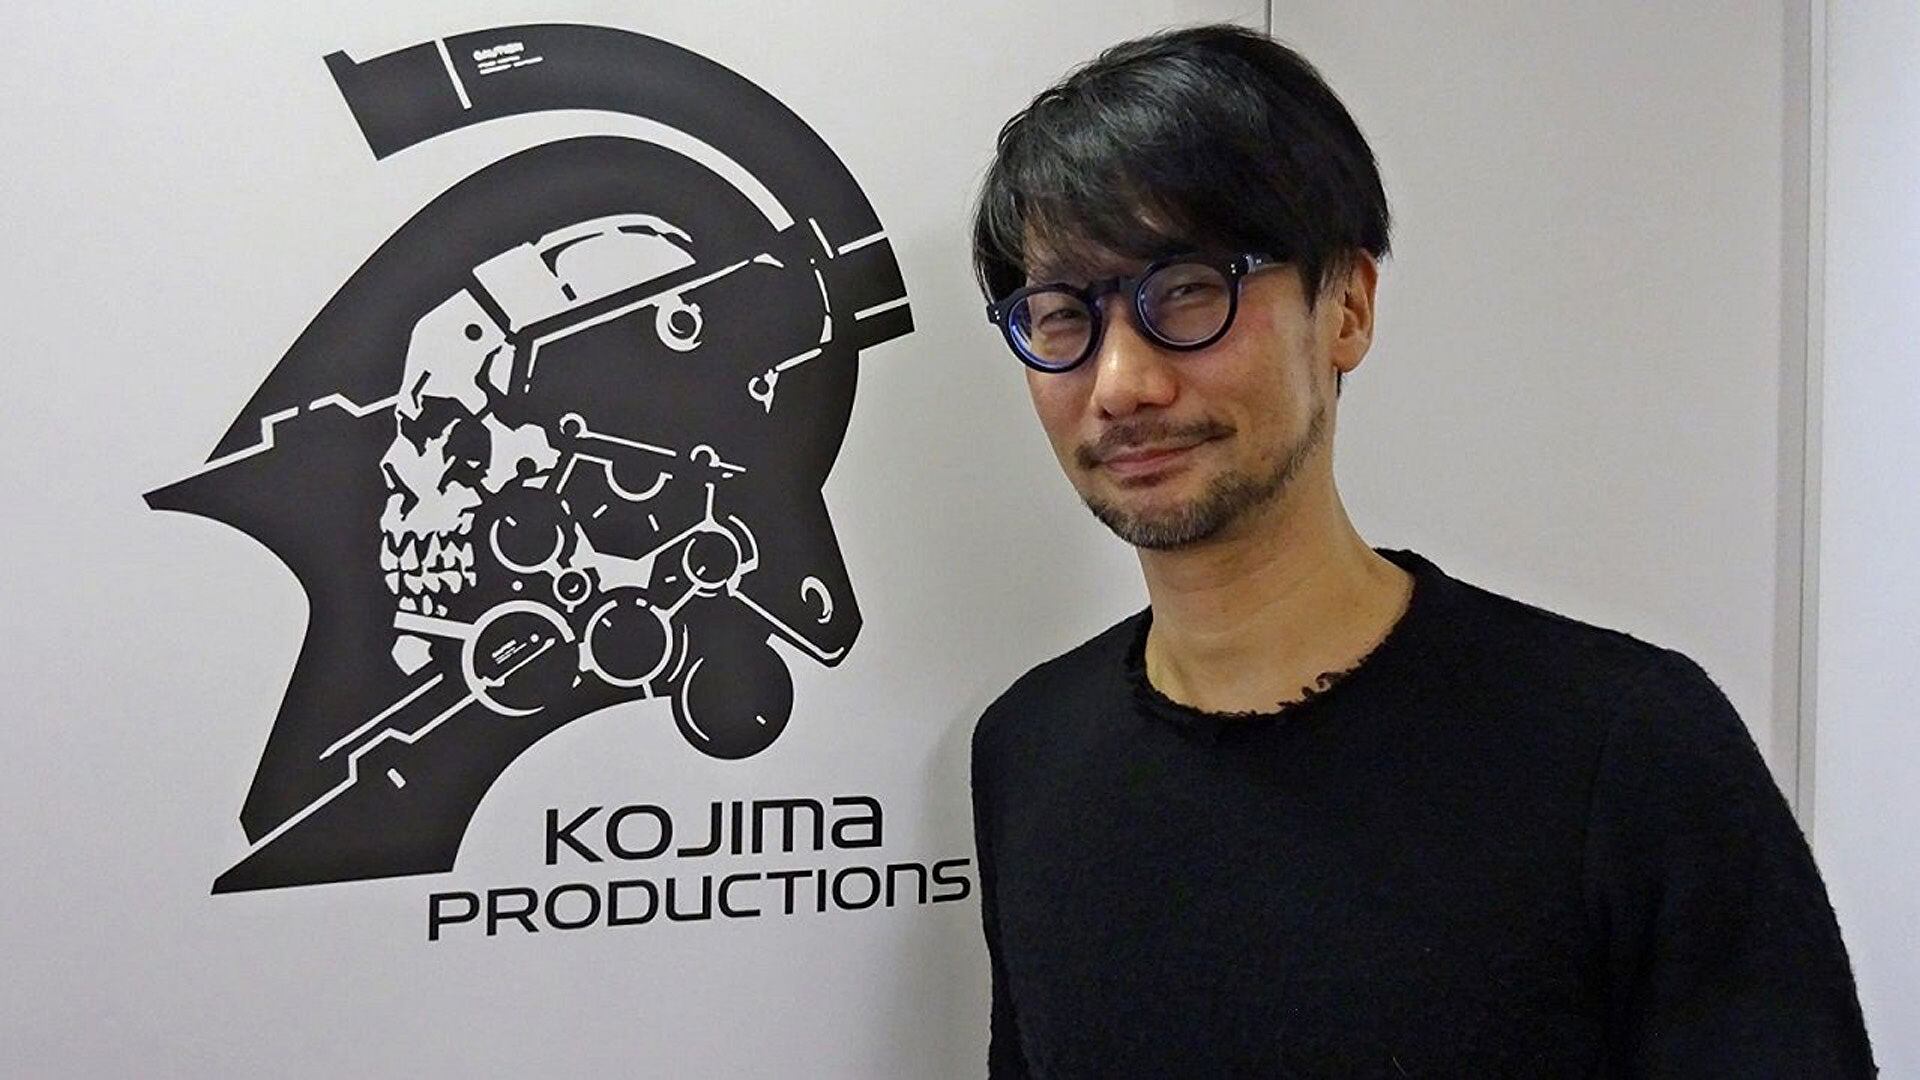 Kojima Productions will stay independent “as long as I’m alive,” says Hideo Kojima